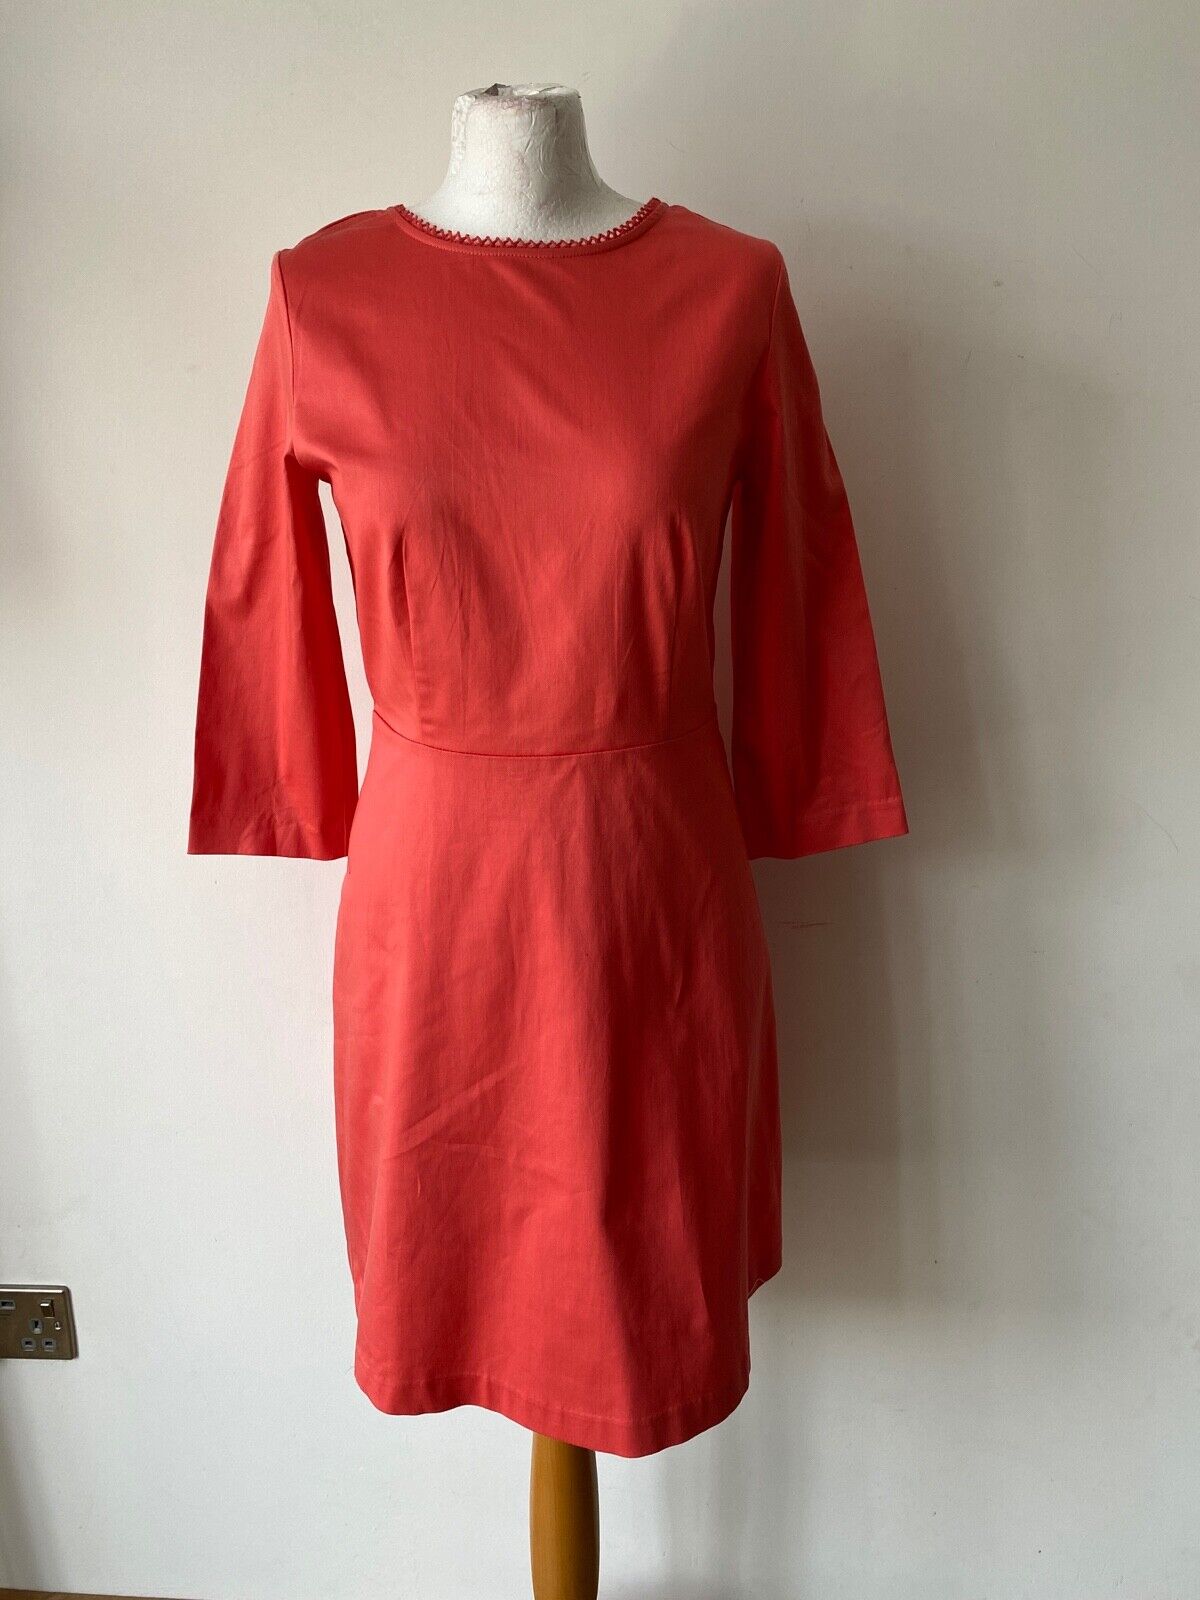 La Redoute R edition Light Red Backless Dress Size 10